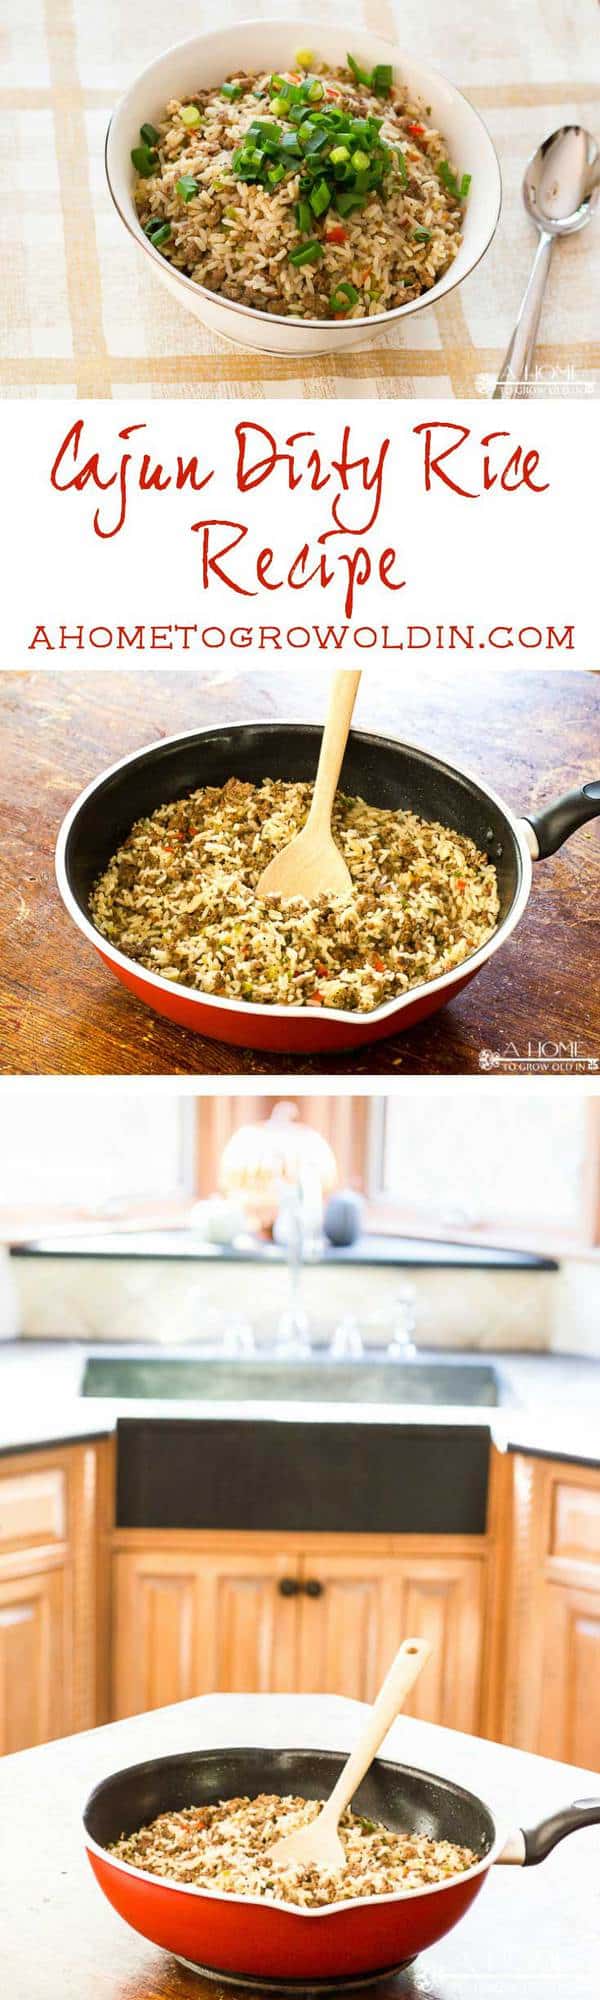 Check out this delicious recipe for cajun dirty rice! It's a great make-ahead side dish for Thanksgiving, Christmas, or any family meal. Perfect with your fried turkey! Pin this for the holidays!